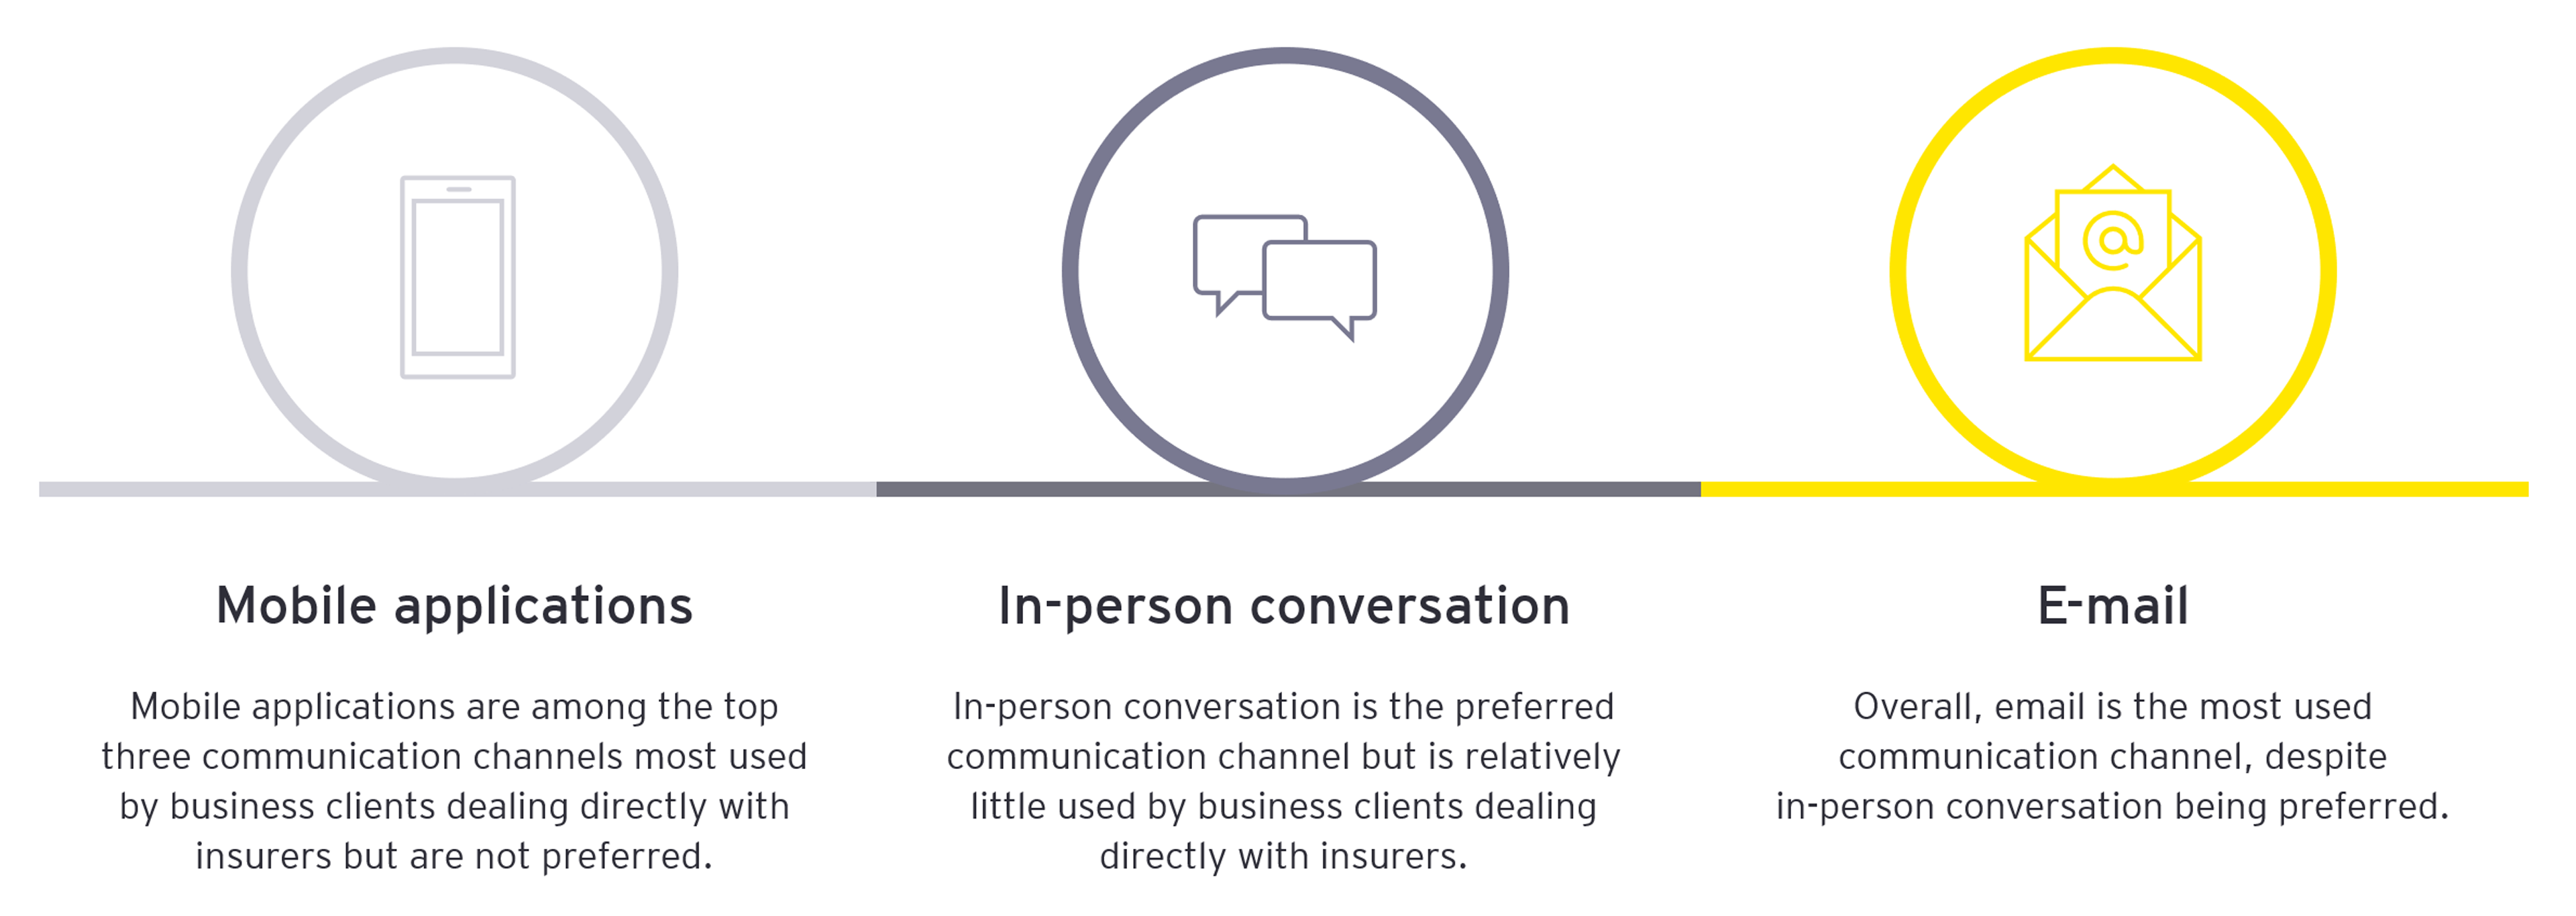 Infographic: communication channels - websites or mobile applications, in-person conversation, e-mail